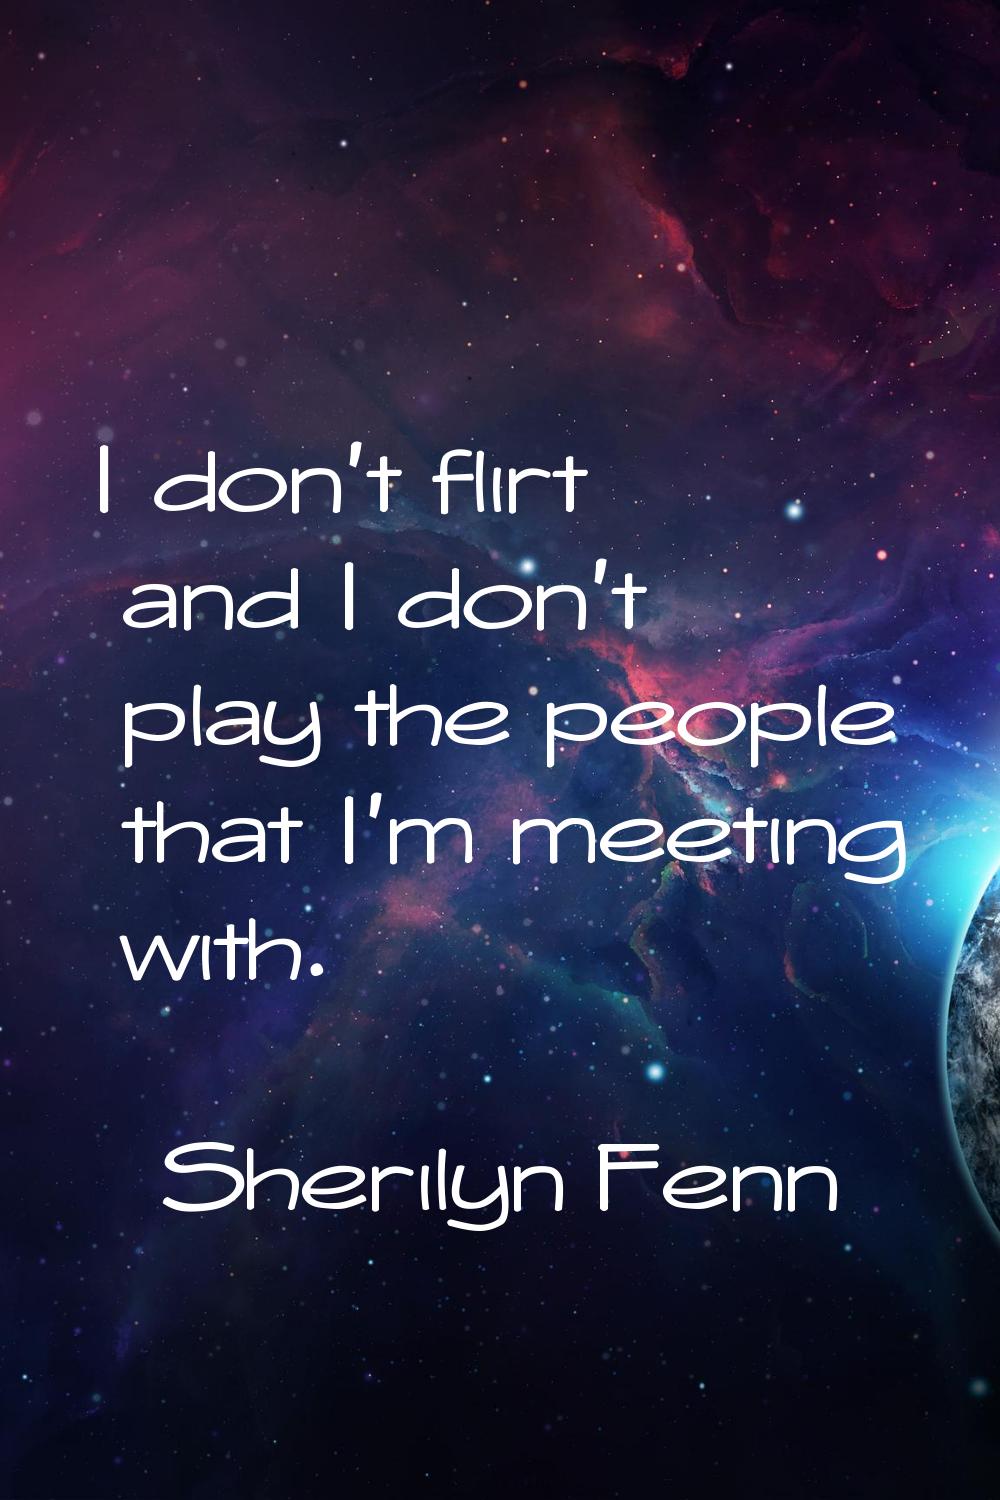 I don't flirt and I don't play the people that I'm meeting with.